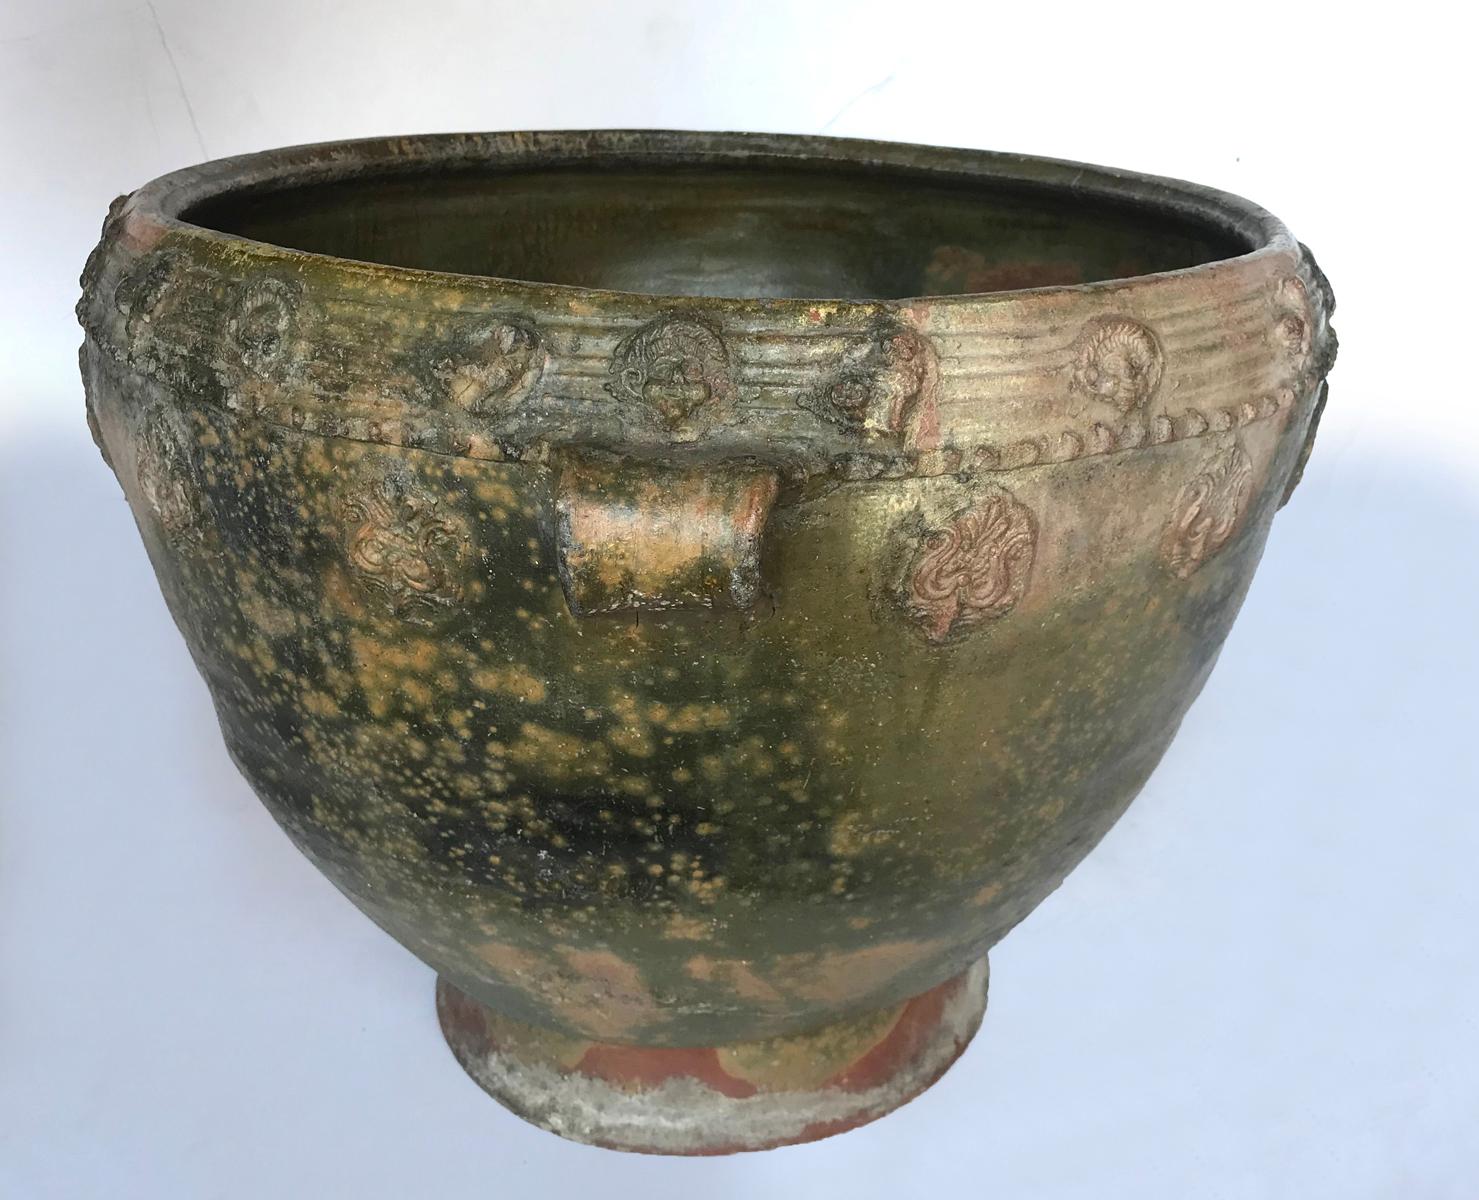 Early 20th century water pot, a Trubal,  from the highlands of Central America.   Delicate applied pottery decorations of animals and faces surround the outer edge. Handmade, wood fired, resulting in a lovely greenish, earthy glaze.
Sturdy and